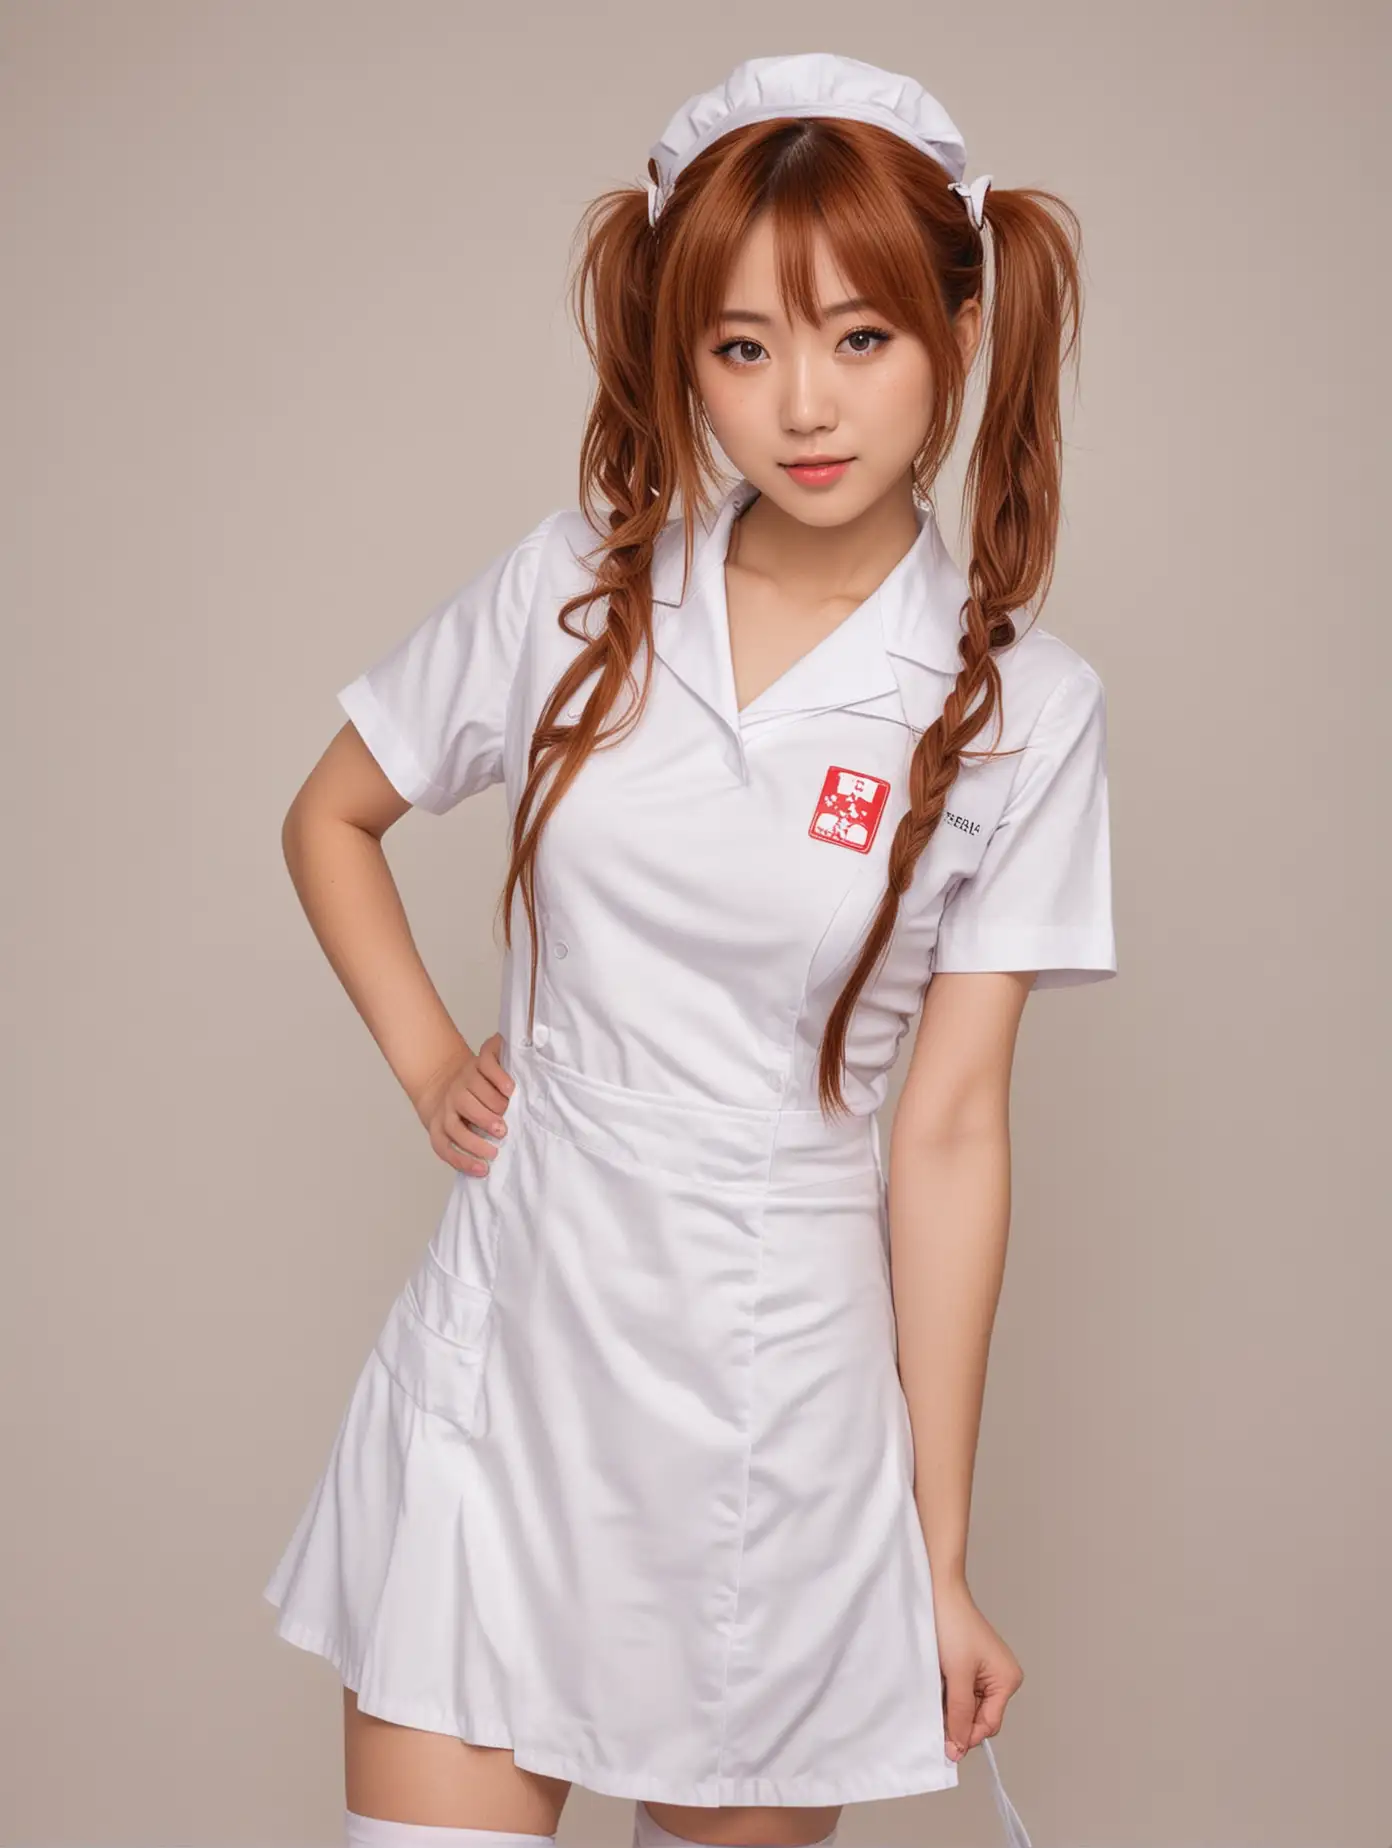 Seductive Japanese Nurse with CaramelColored Hair and Amber Eyes